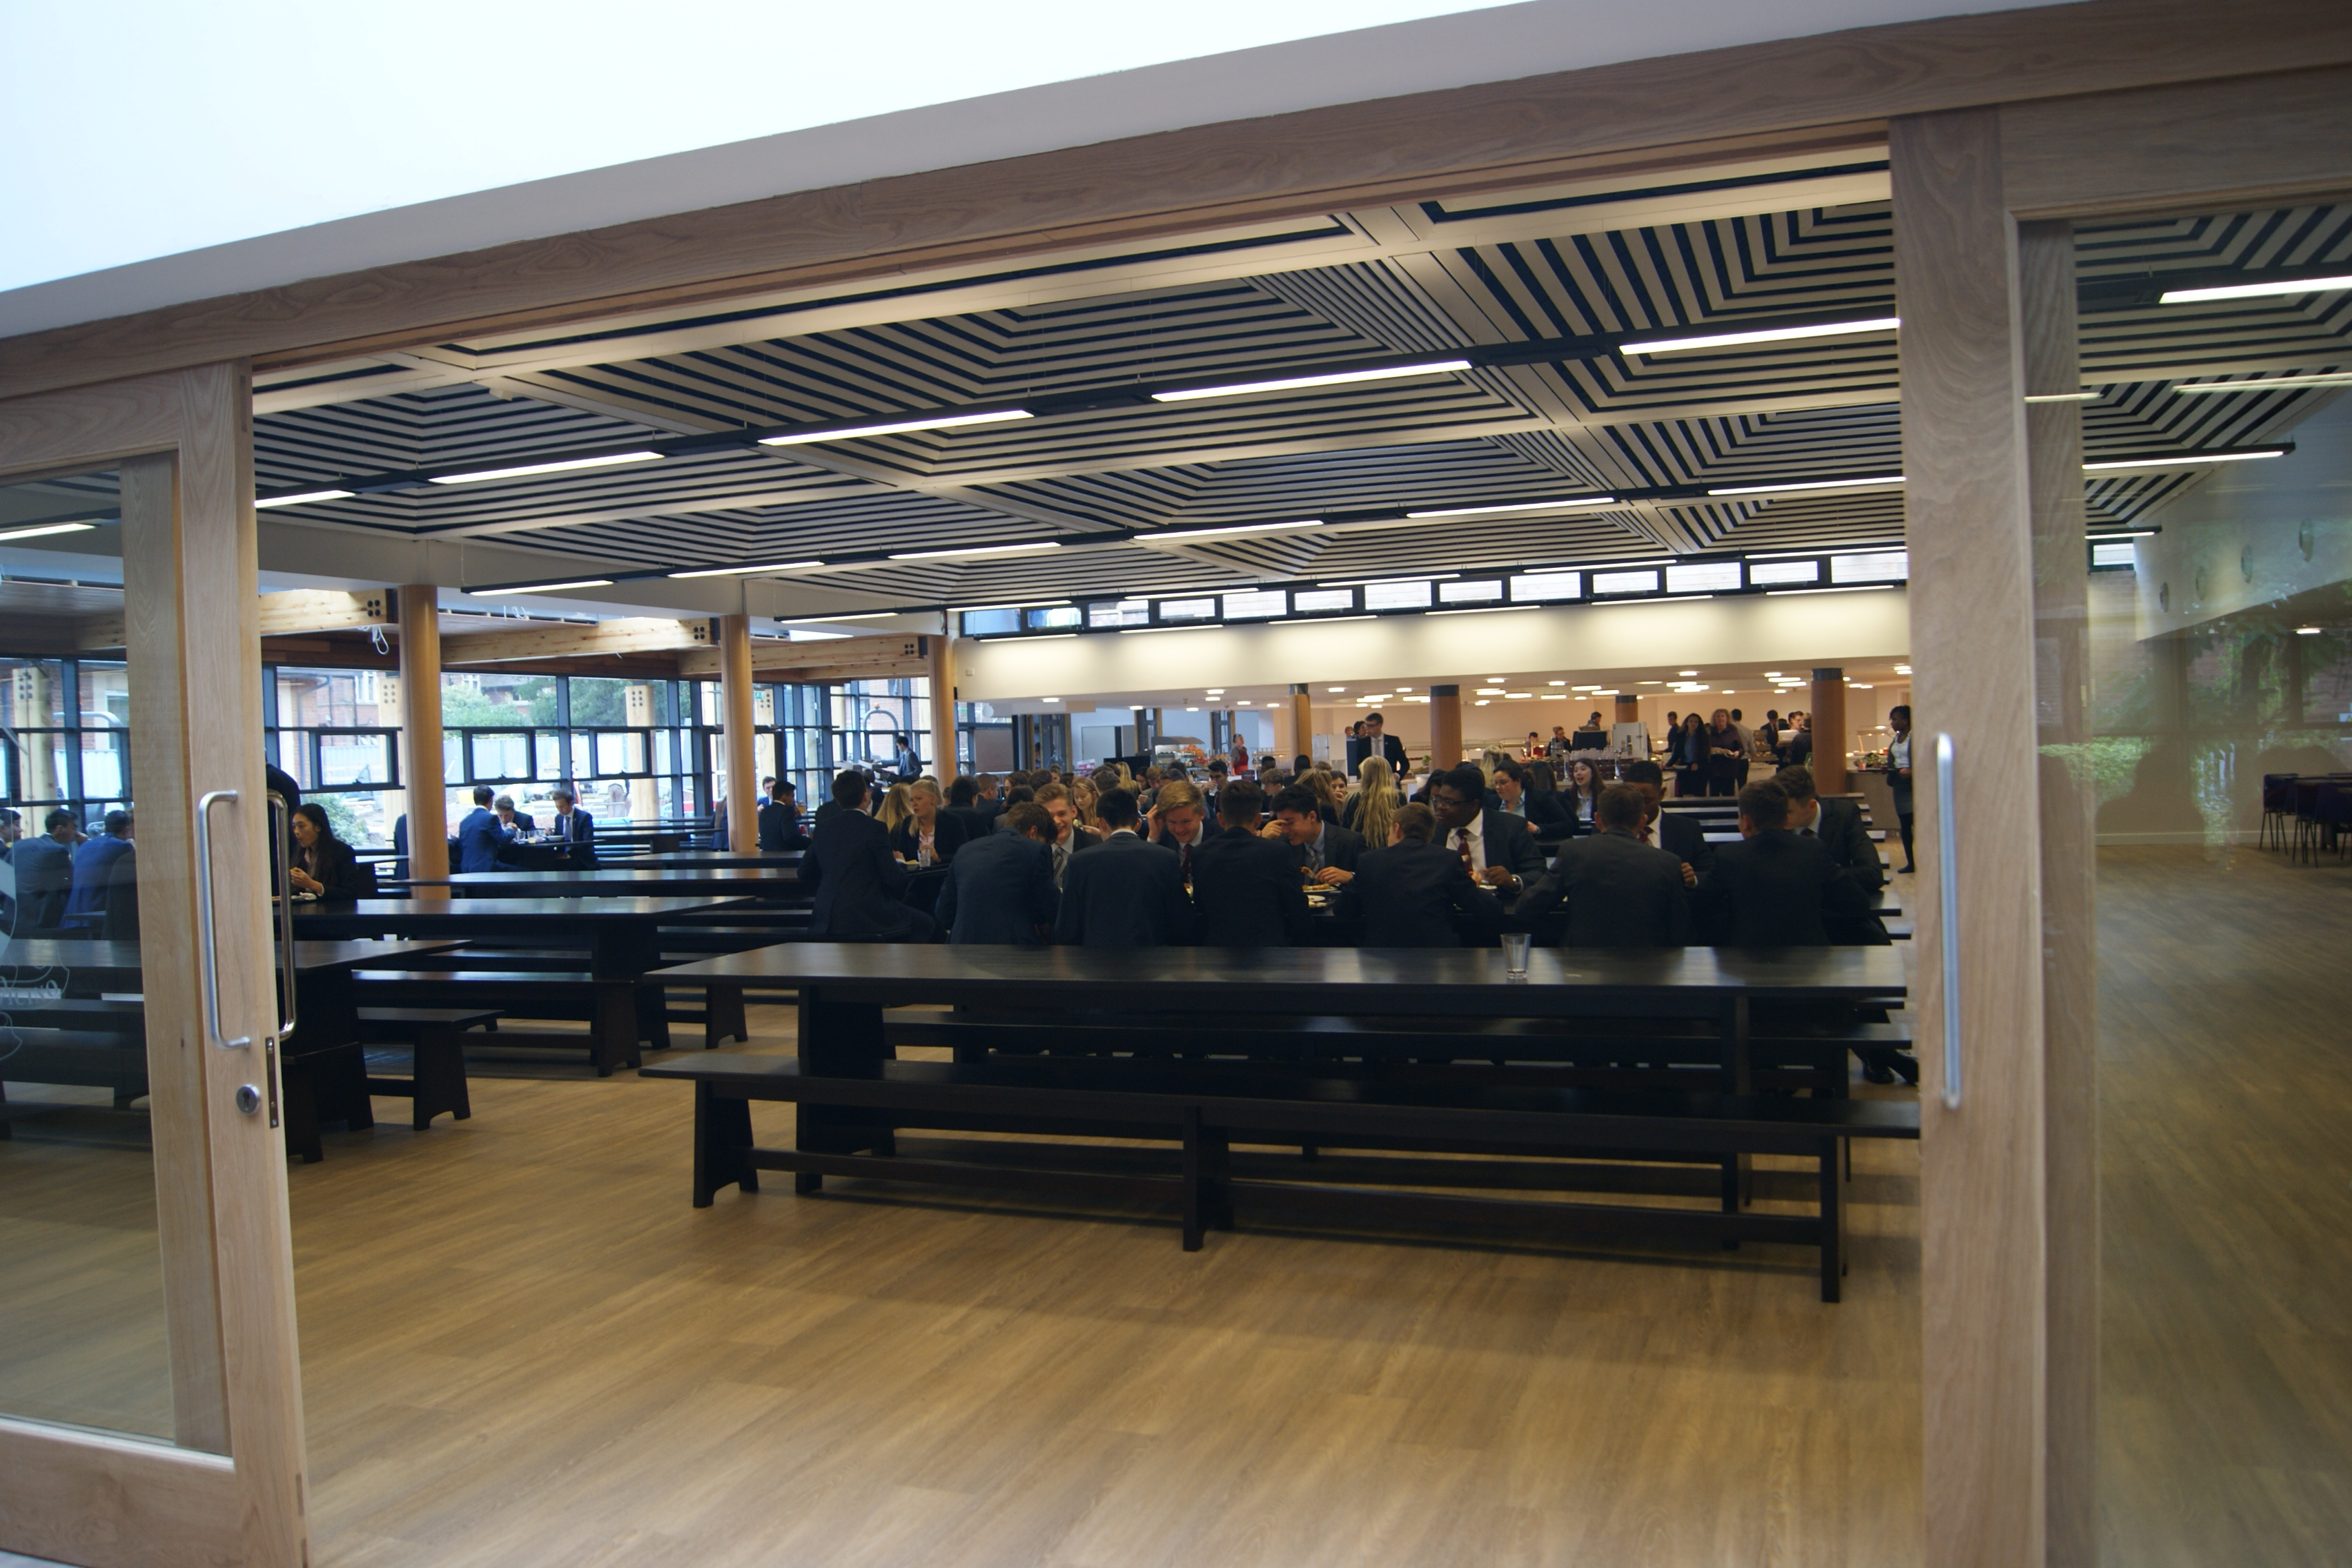 The Senior School Dining Hall which opened after refurbishment in September 2015